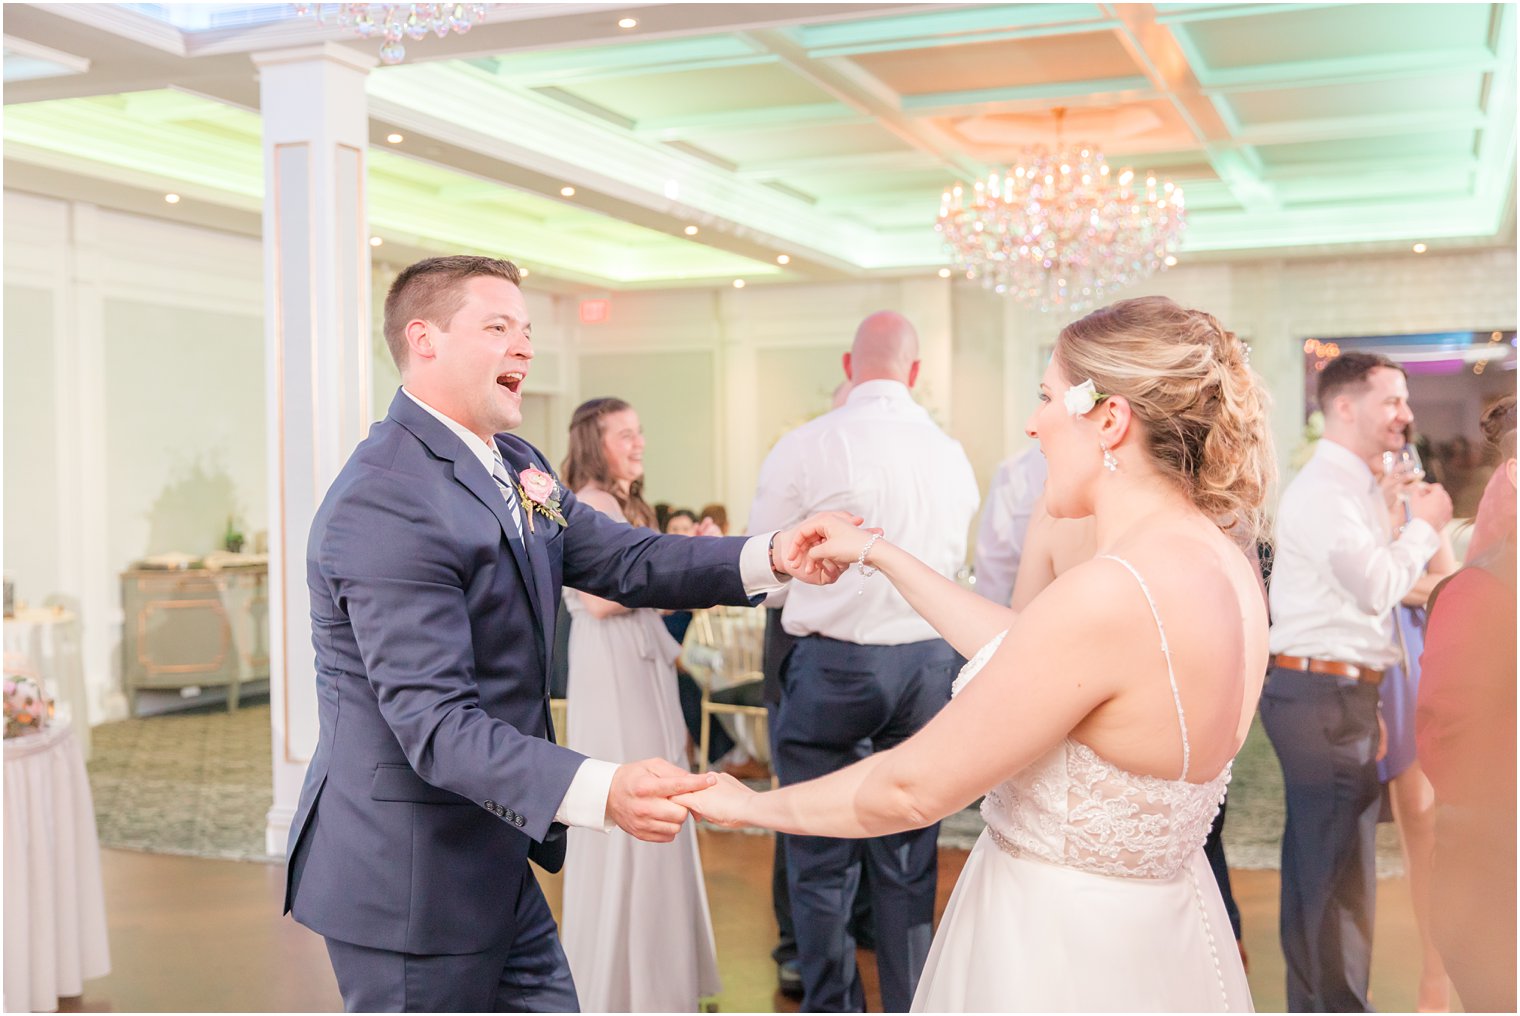 Bride and groom dancing during wedding reception at The Mill at Lakeside Manor in Spring Lake NJ